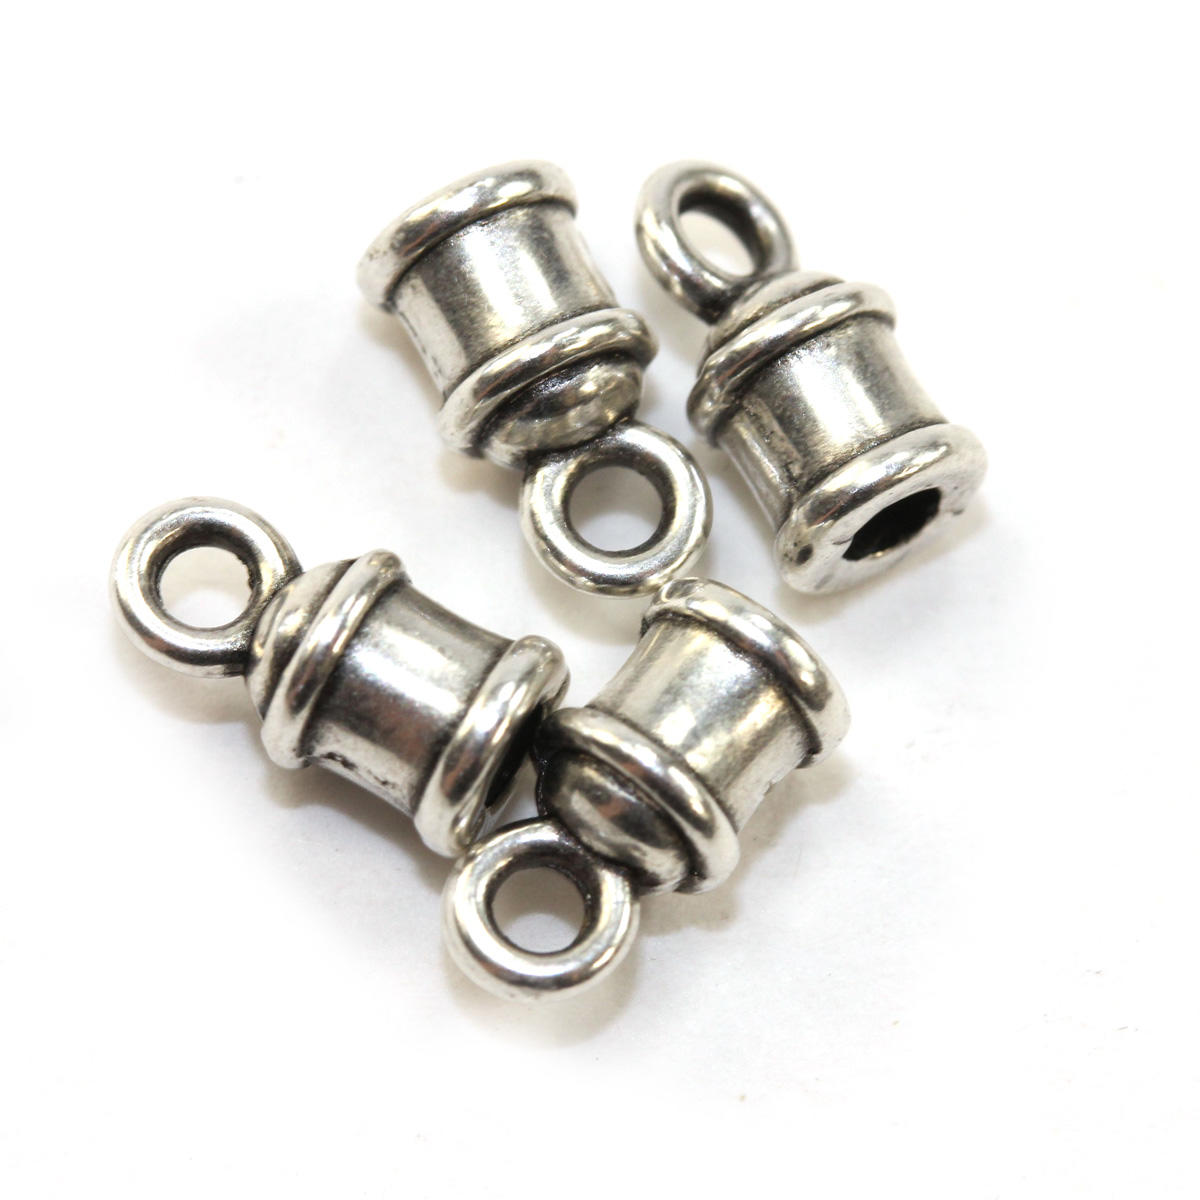 Small End Cord Cap Jewellery Component